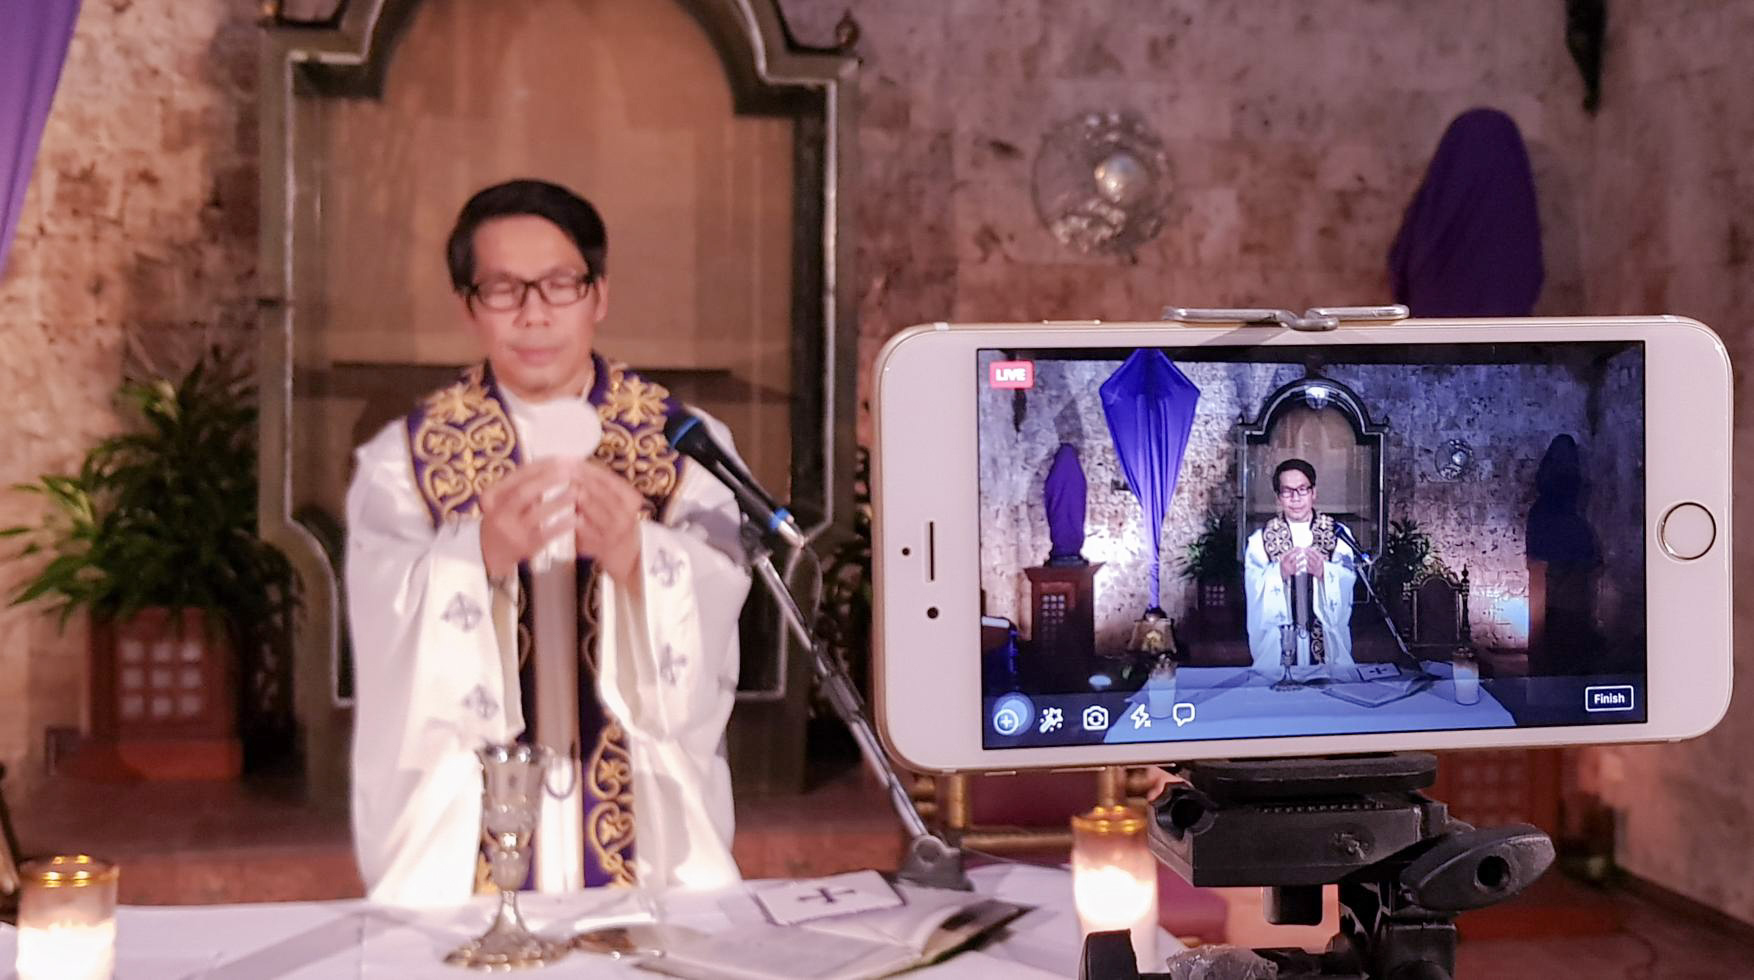 FACEBOOK LIVE. Fr. Joselito Danao of the Archdiocesan Shrine of the Immaculate Heart of Mary in Minglanilla, Cebu holds a mass and streams it via Facebook Live. Fr. Danao said livesteaming introduces a new avenue in encountering God using digital tools.